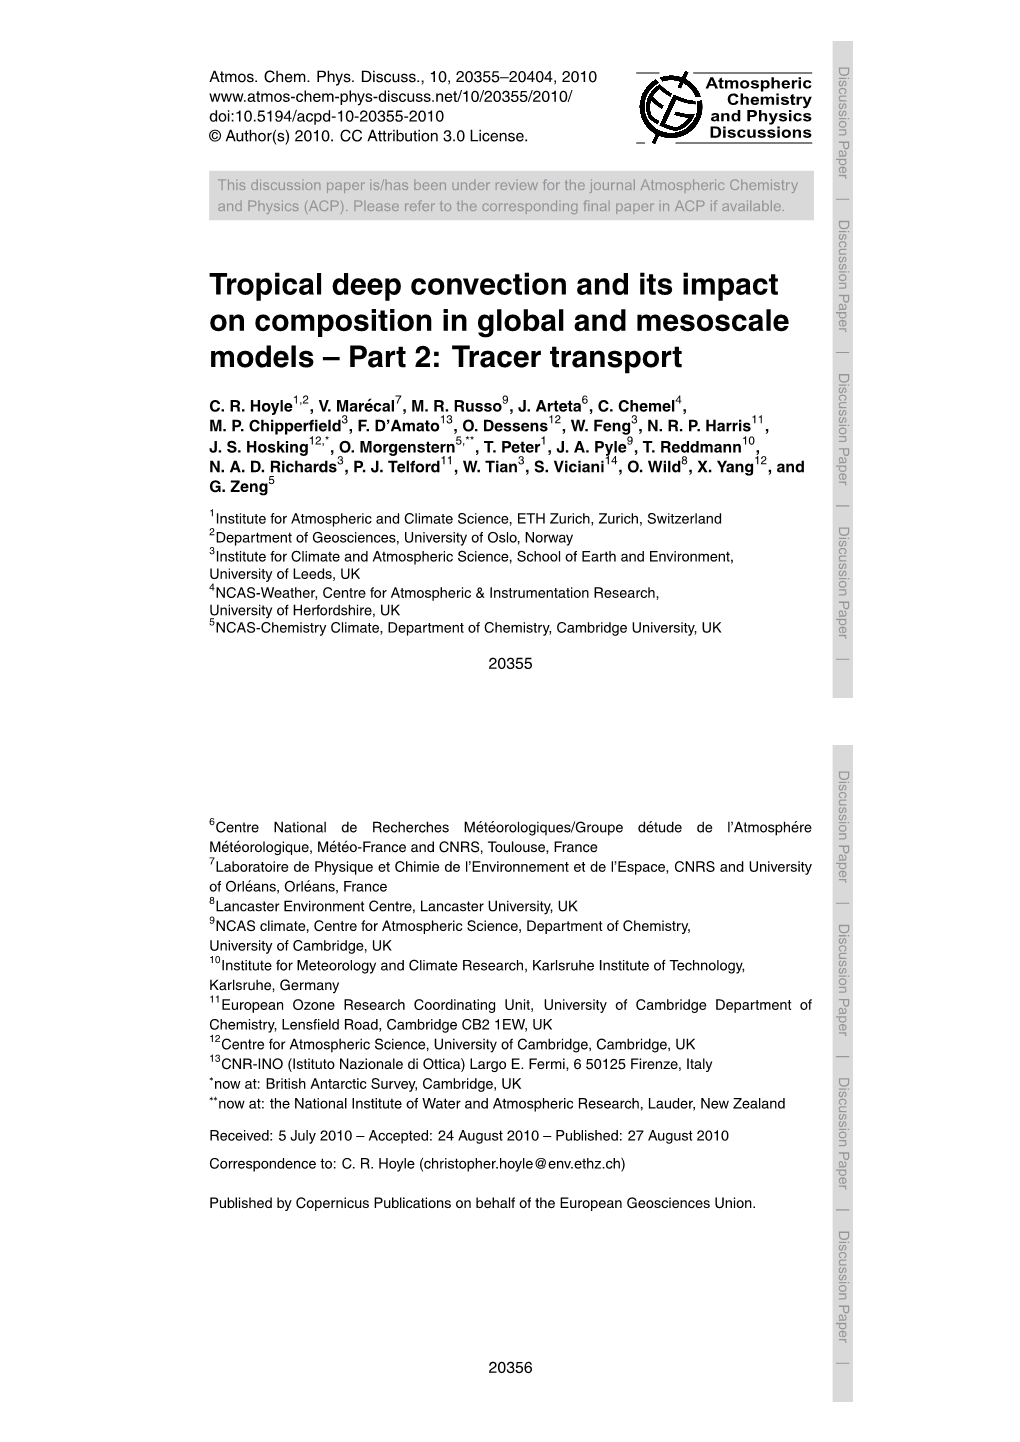 Tropical Deep Convection and Its Impact on Composition in Global